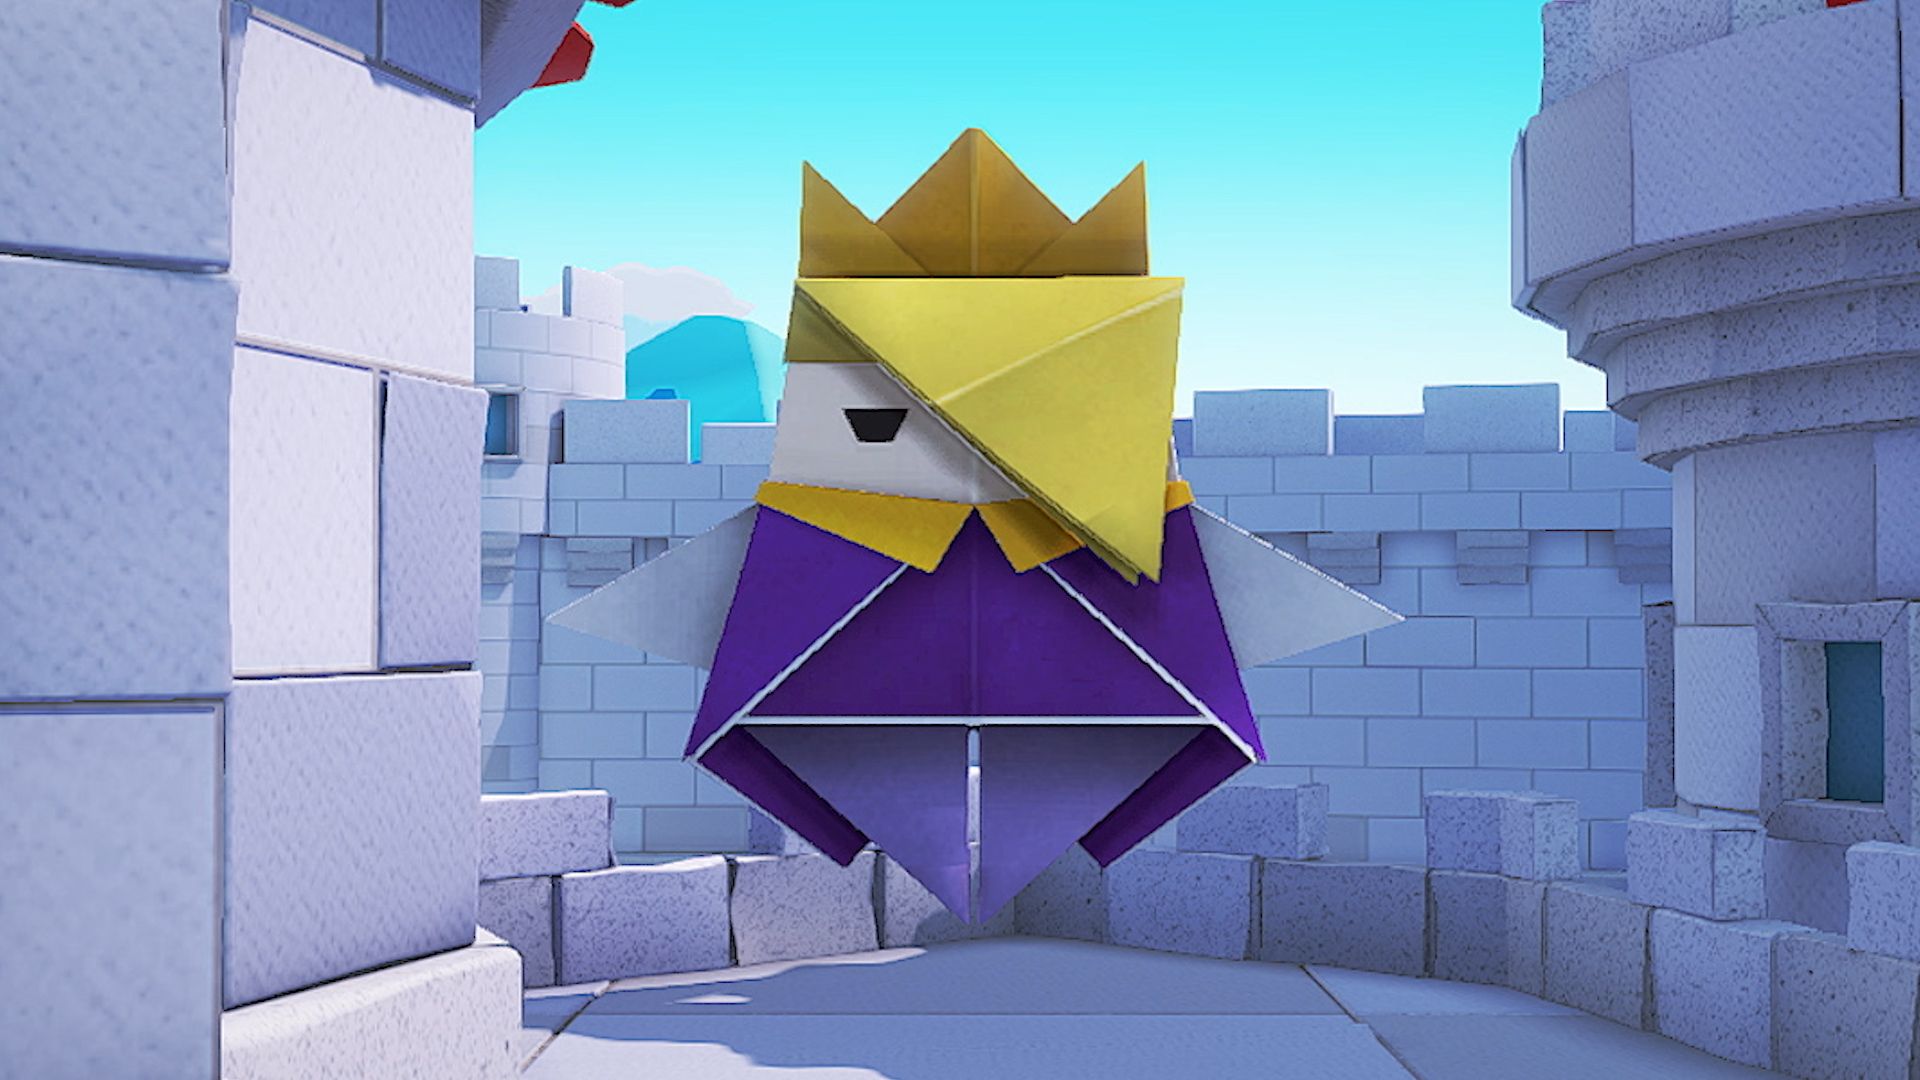 Paper Mario: The Origami King might not be the RPG return fans